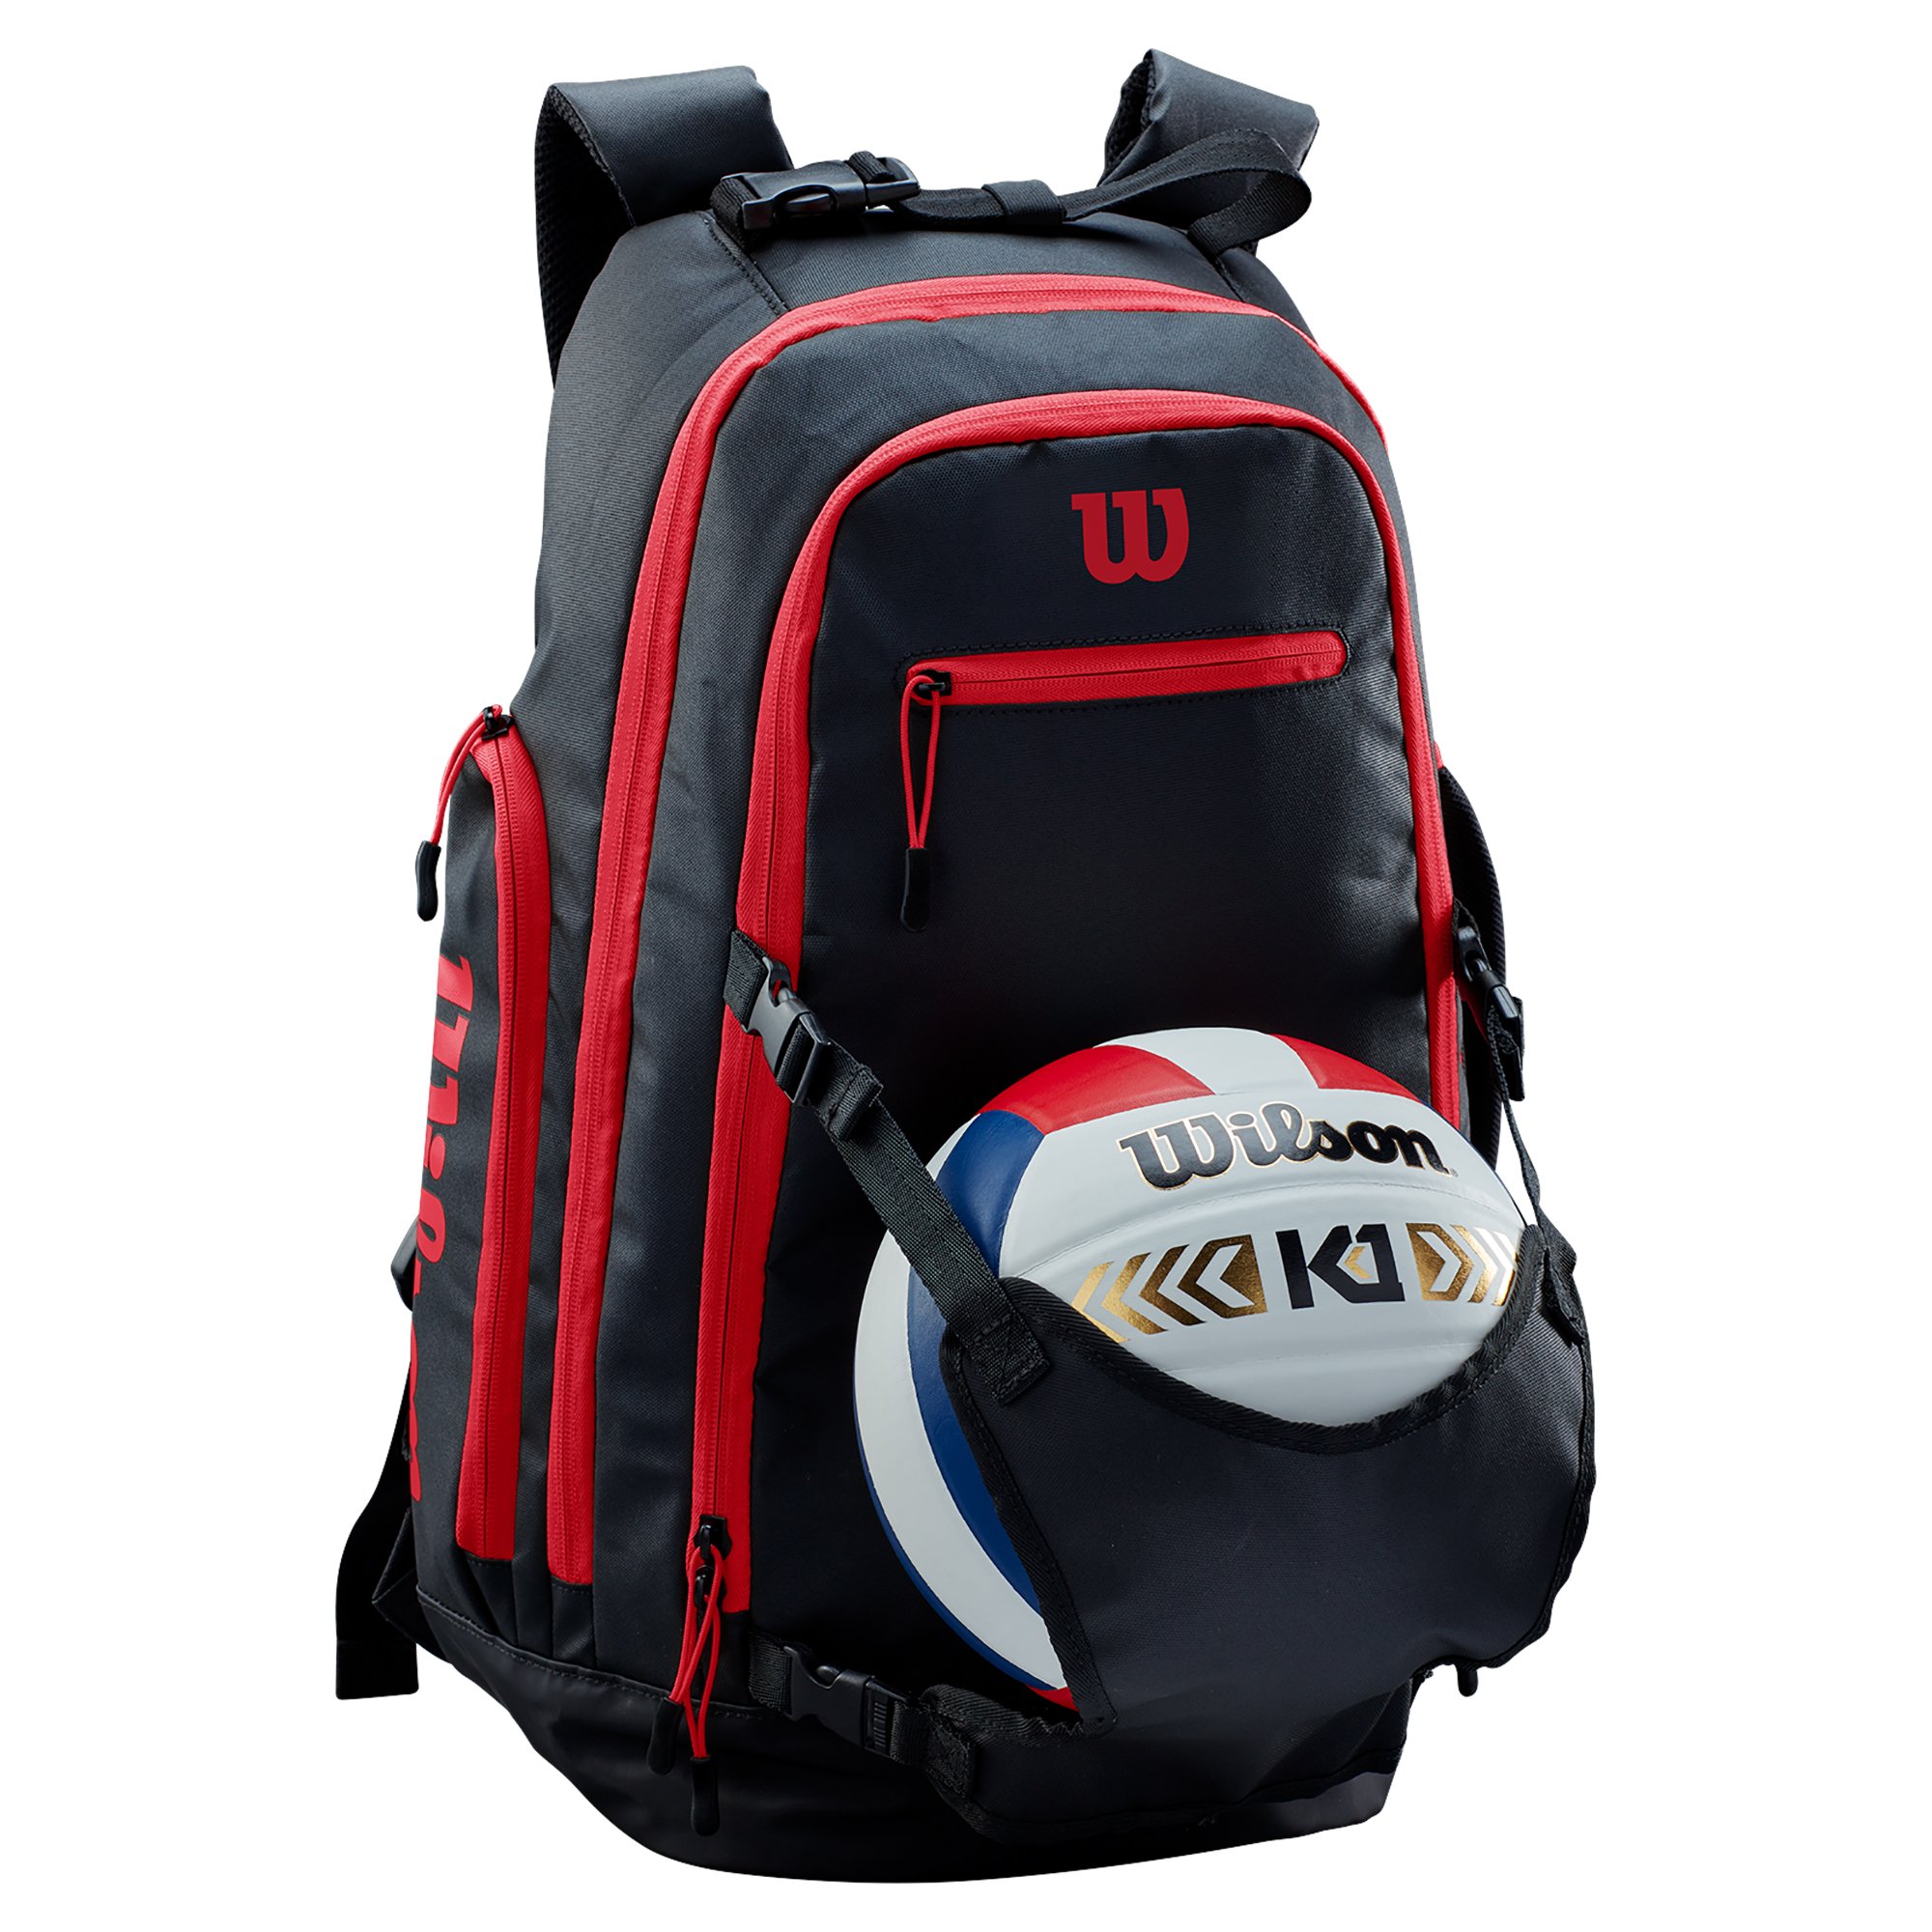 Wilson Volleyball Backpack